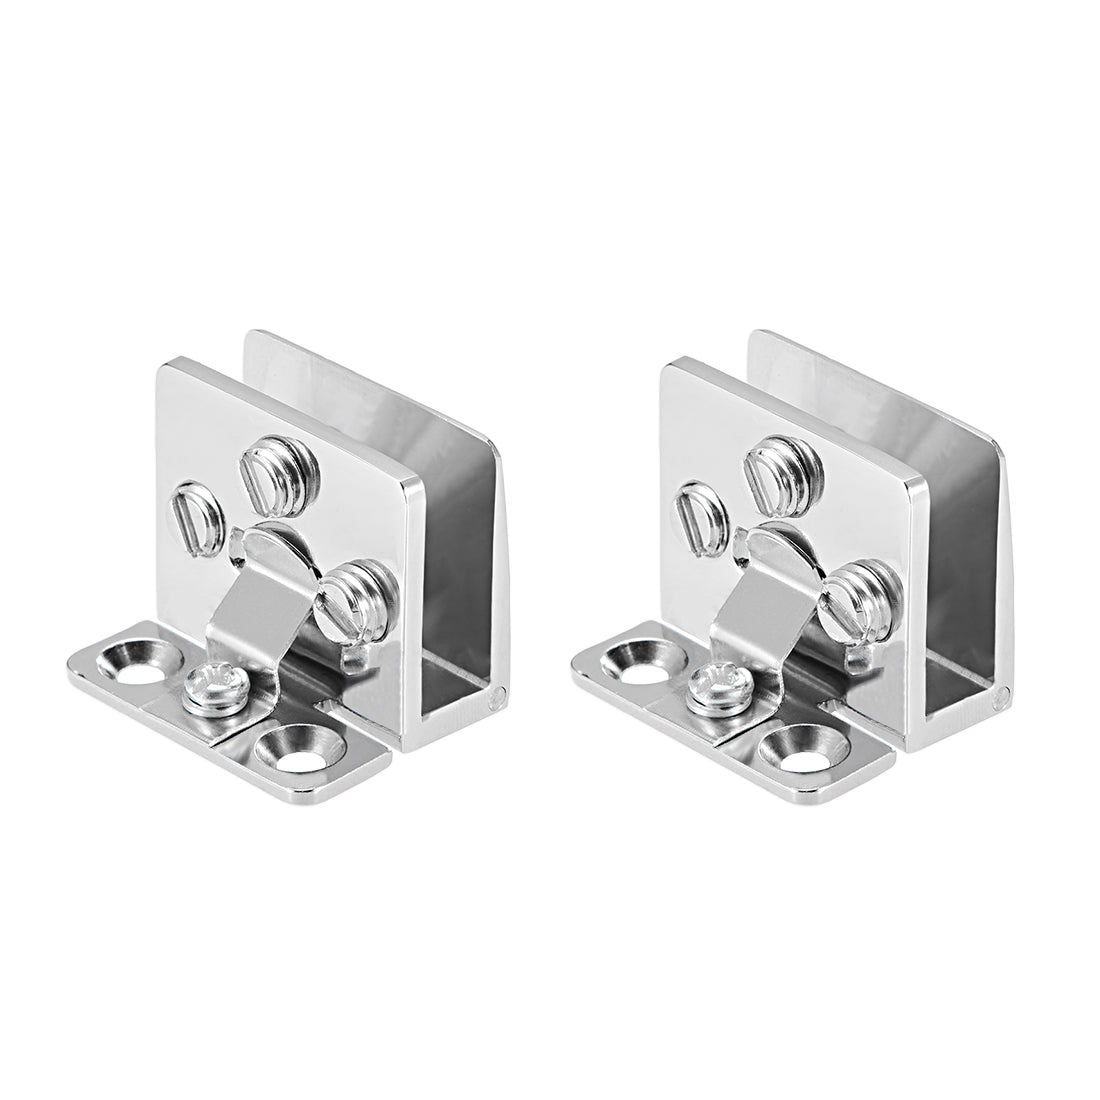 uxcell Uxcell Glass Hinge Cupboard Showcase Cabinet Door Hinge Glass Clamp ,Zinc Alloy , for 5-8mm Glass Thickness 2Pcs